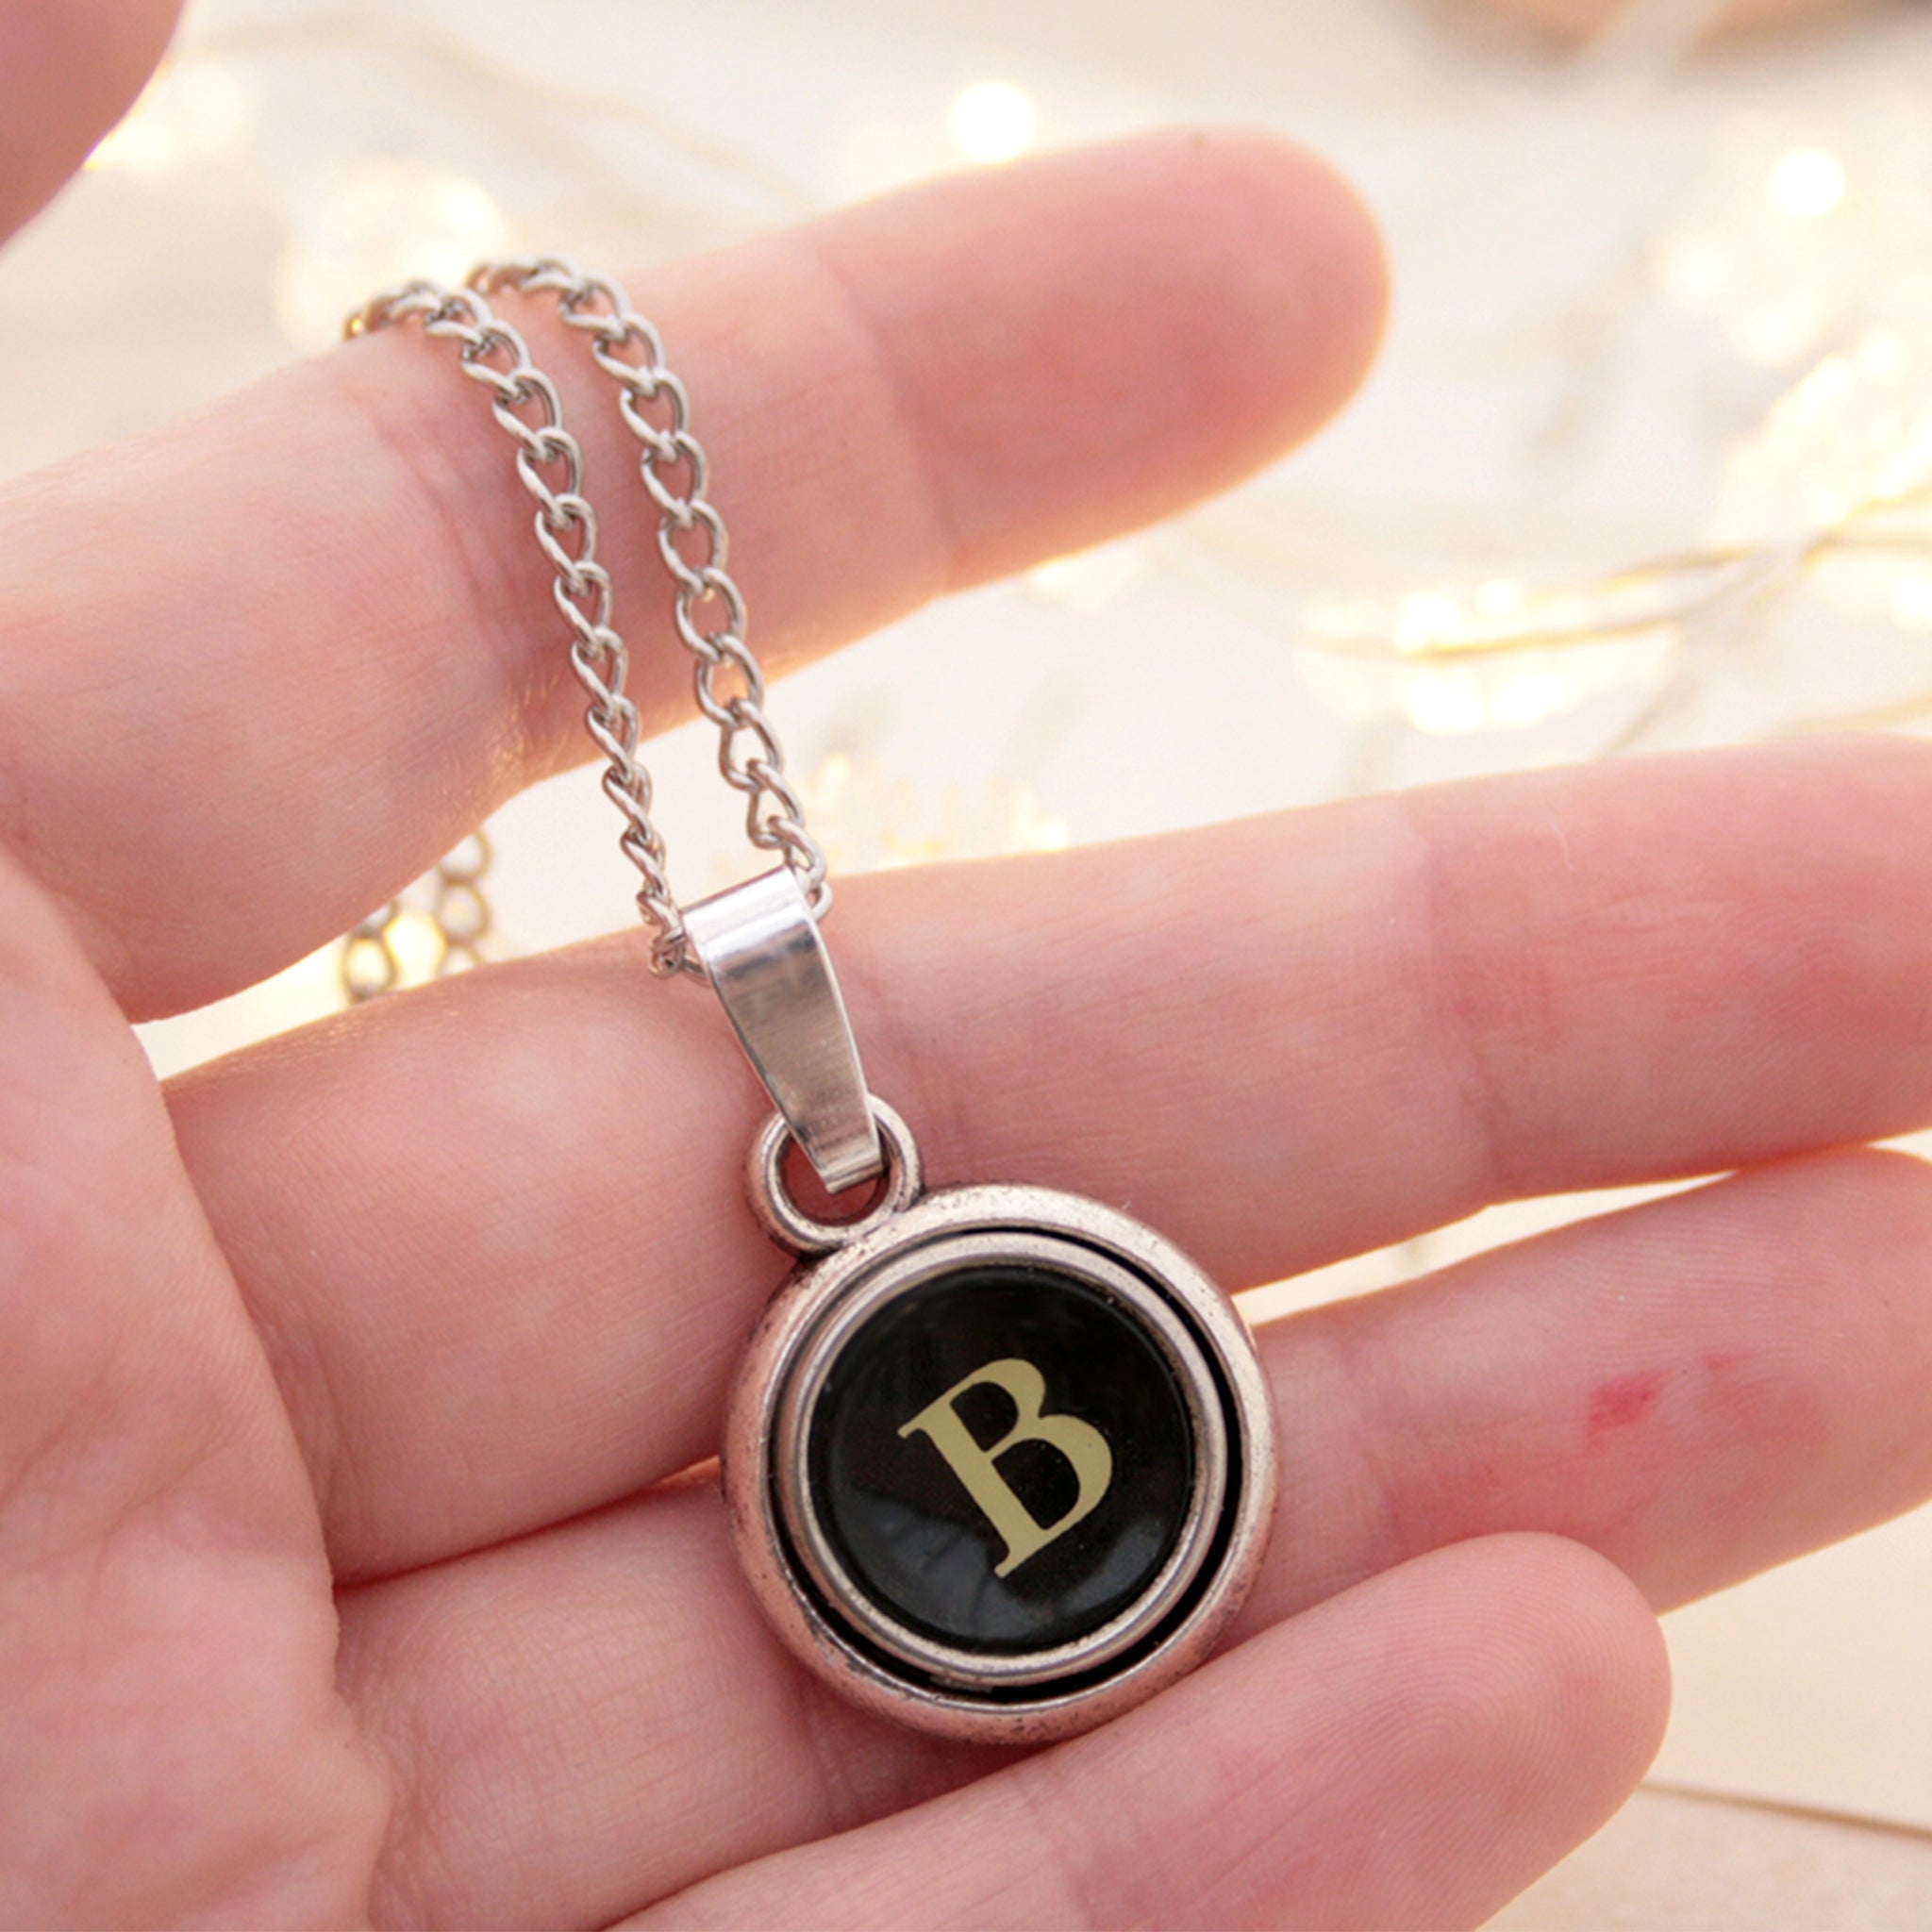 B letter typewriter necklaces made of real typewriter keys hold in hand